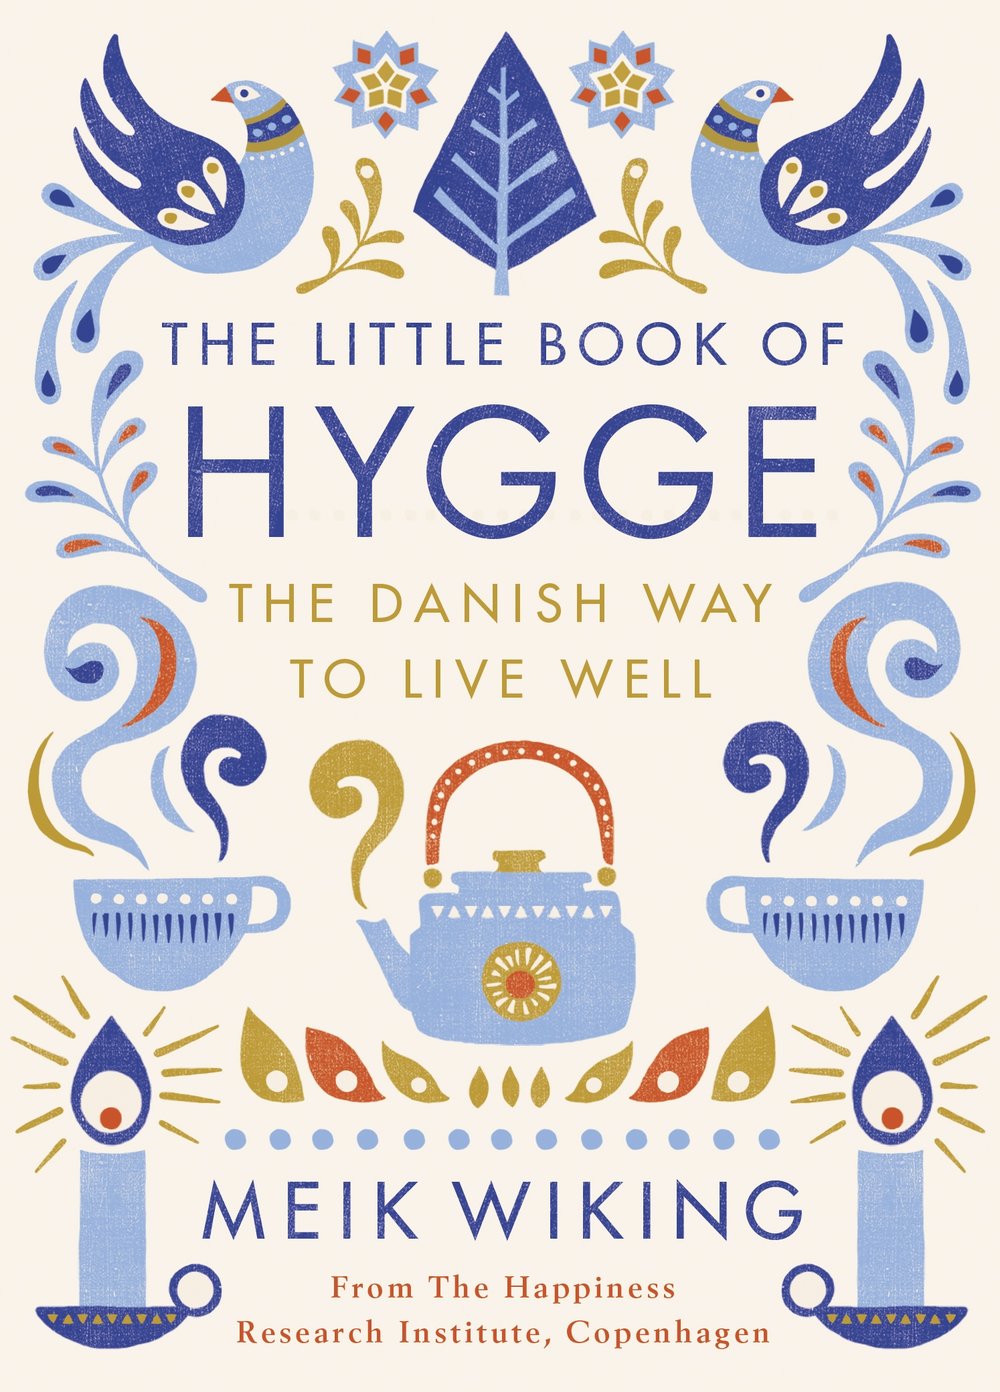 Hygge the art of celebrating life, little things and